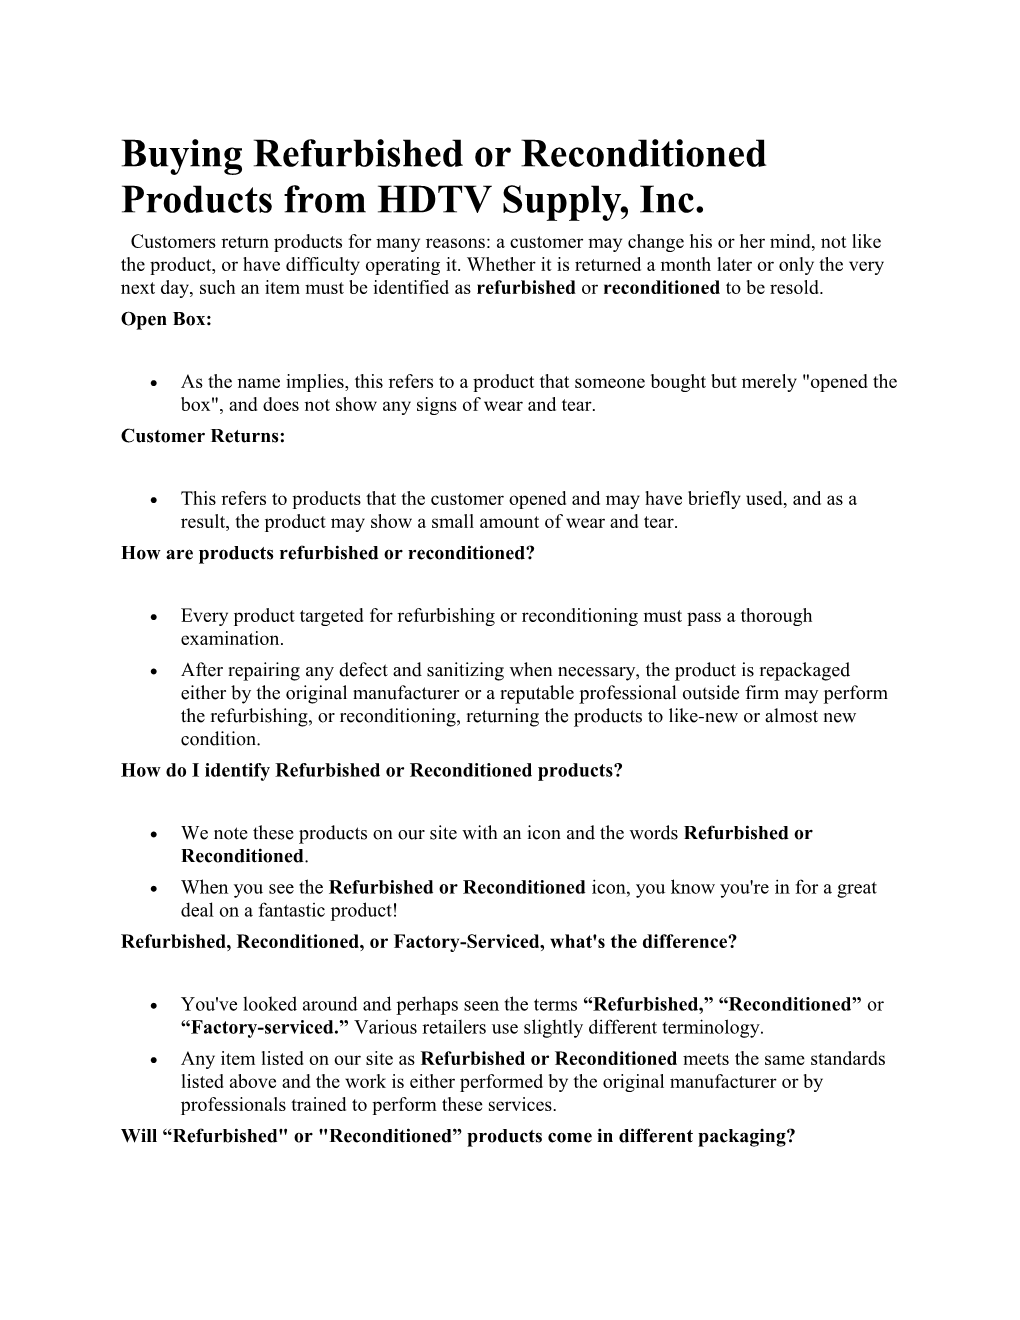 Buying Refurbished Or Reconditioned Products from HDTV Supply, Inc